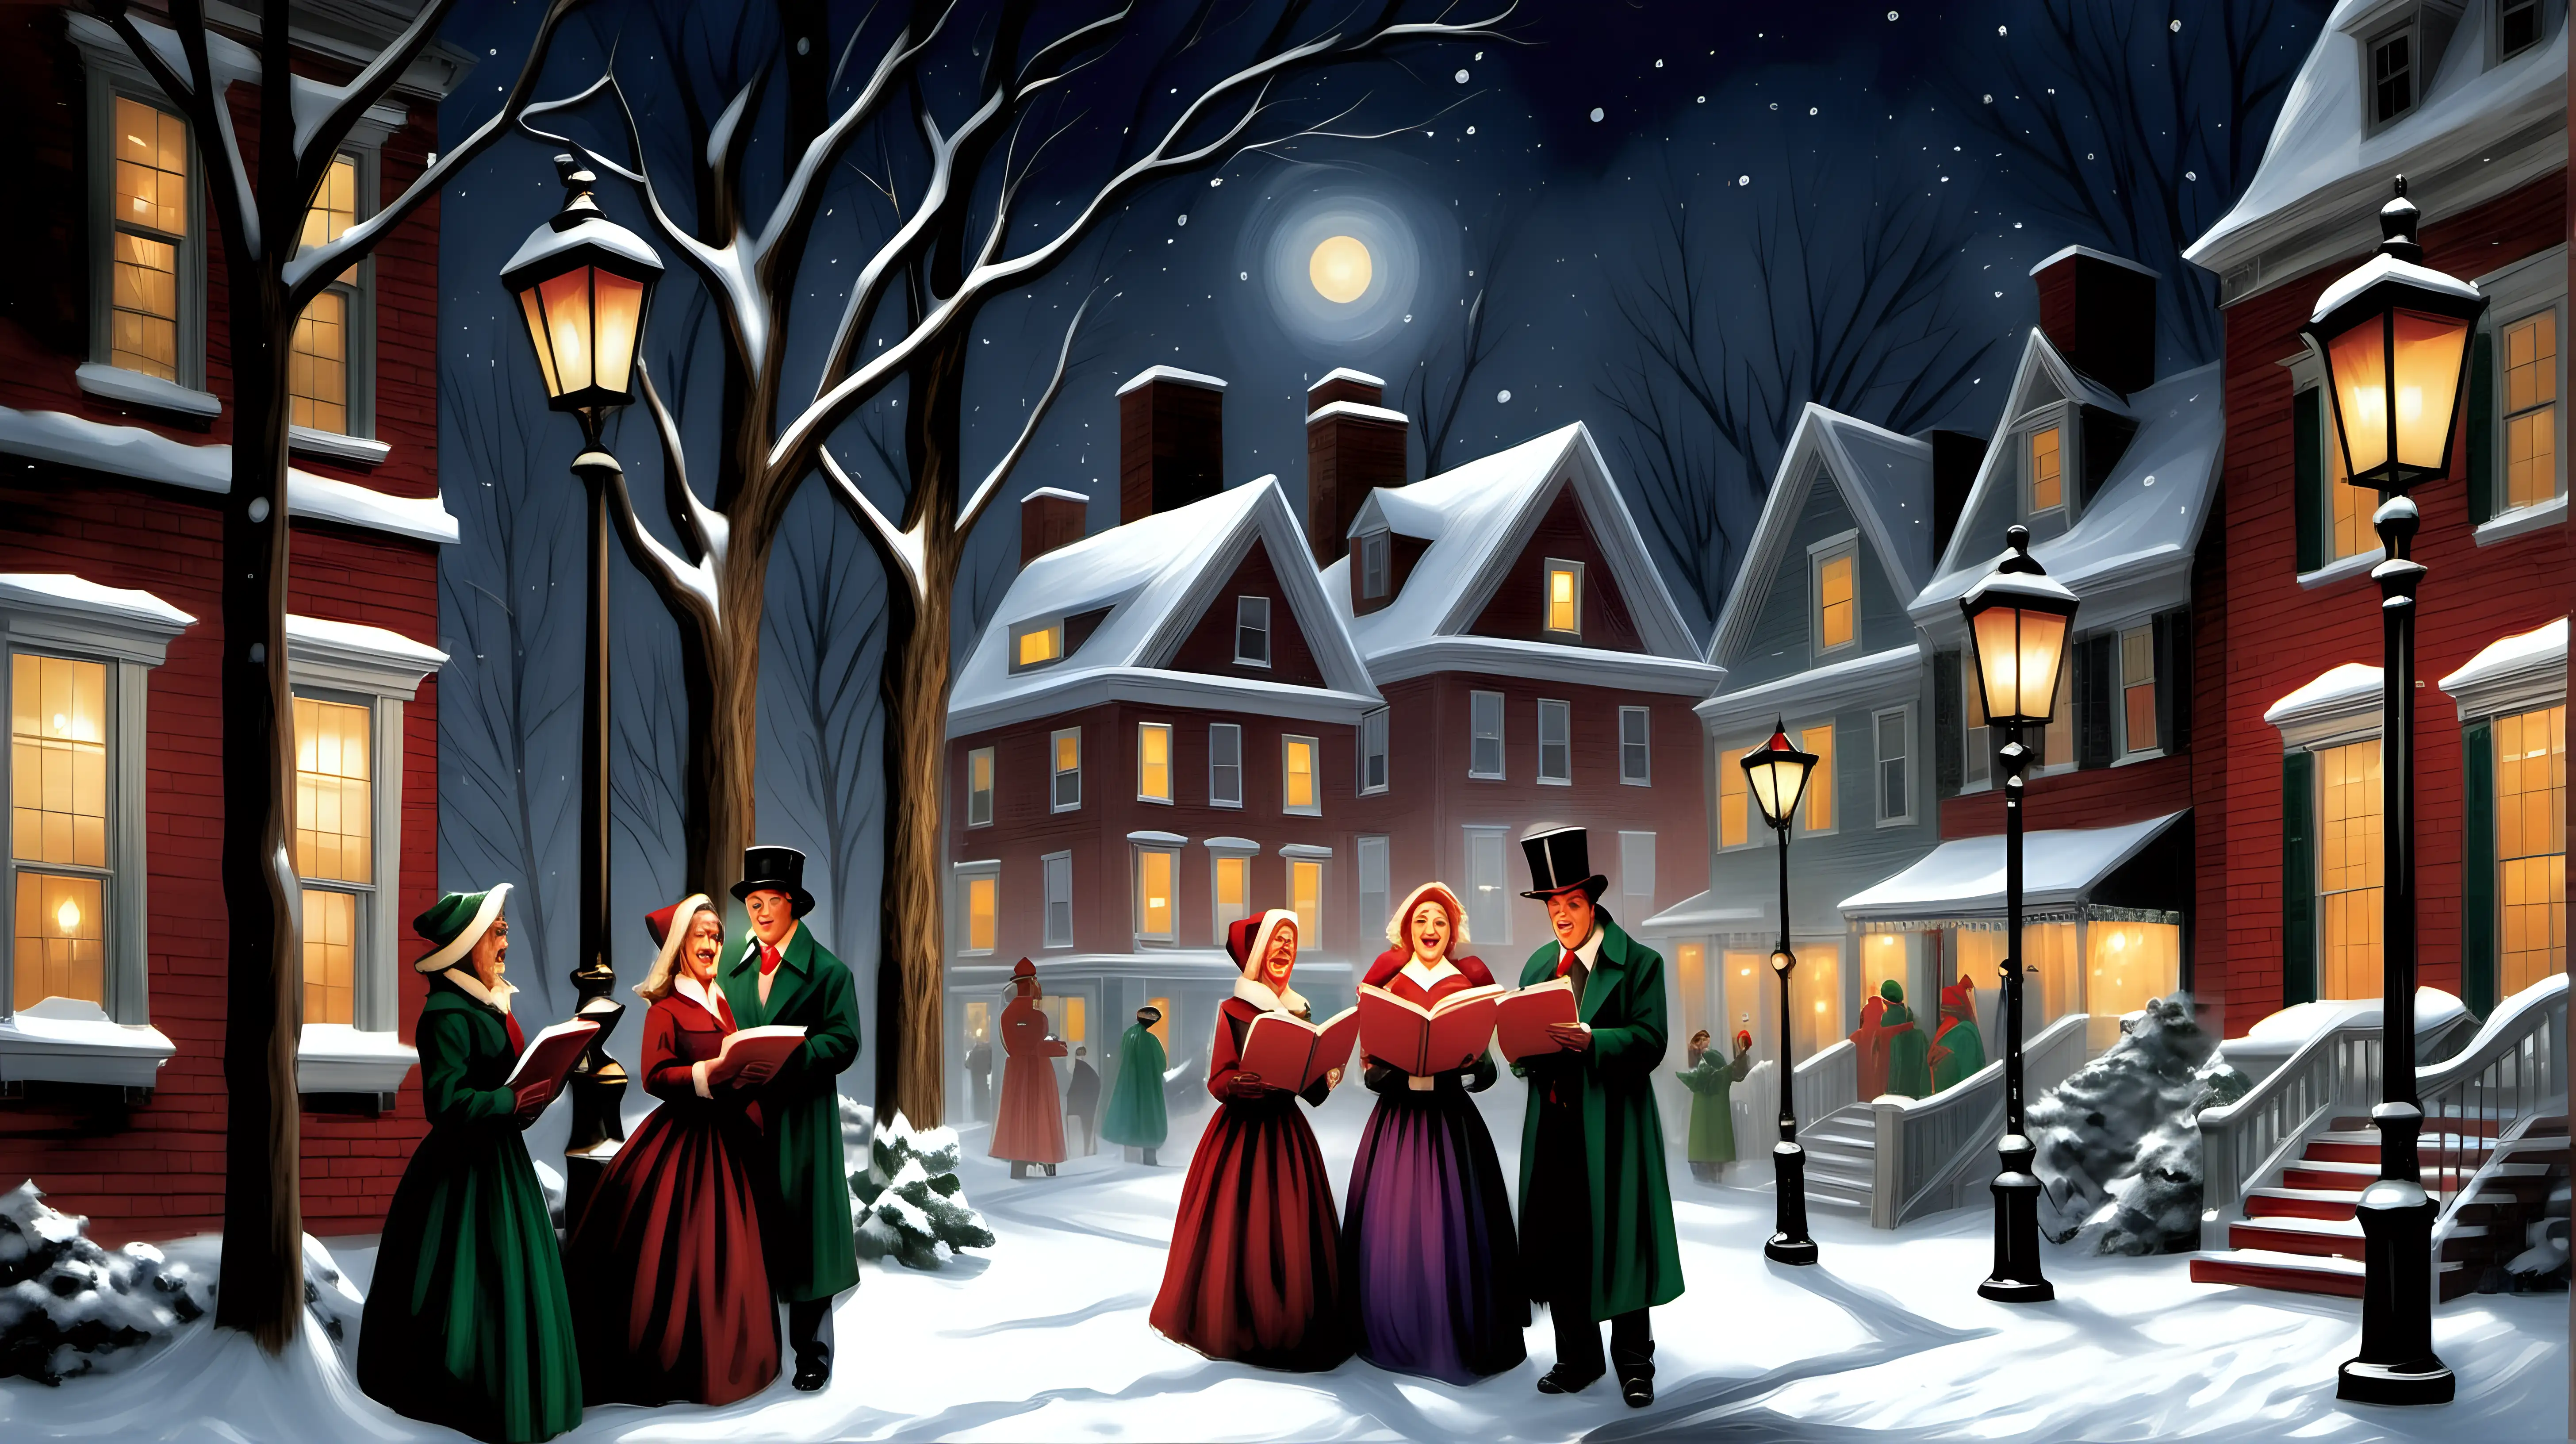 "Frame a picturesque scene of carolers singing beneath the glow of lampposts on a snowy evening."